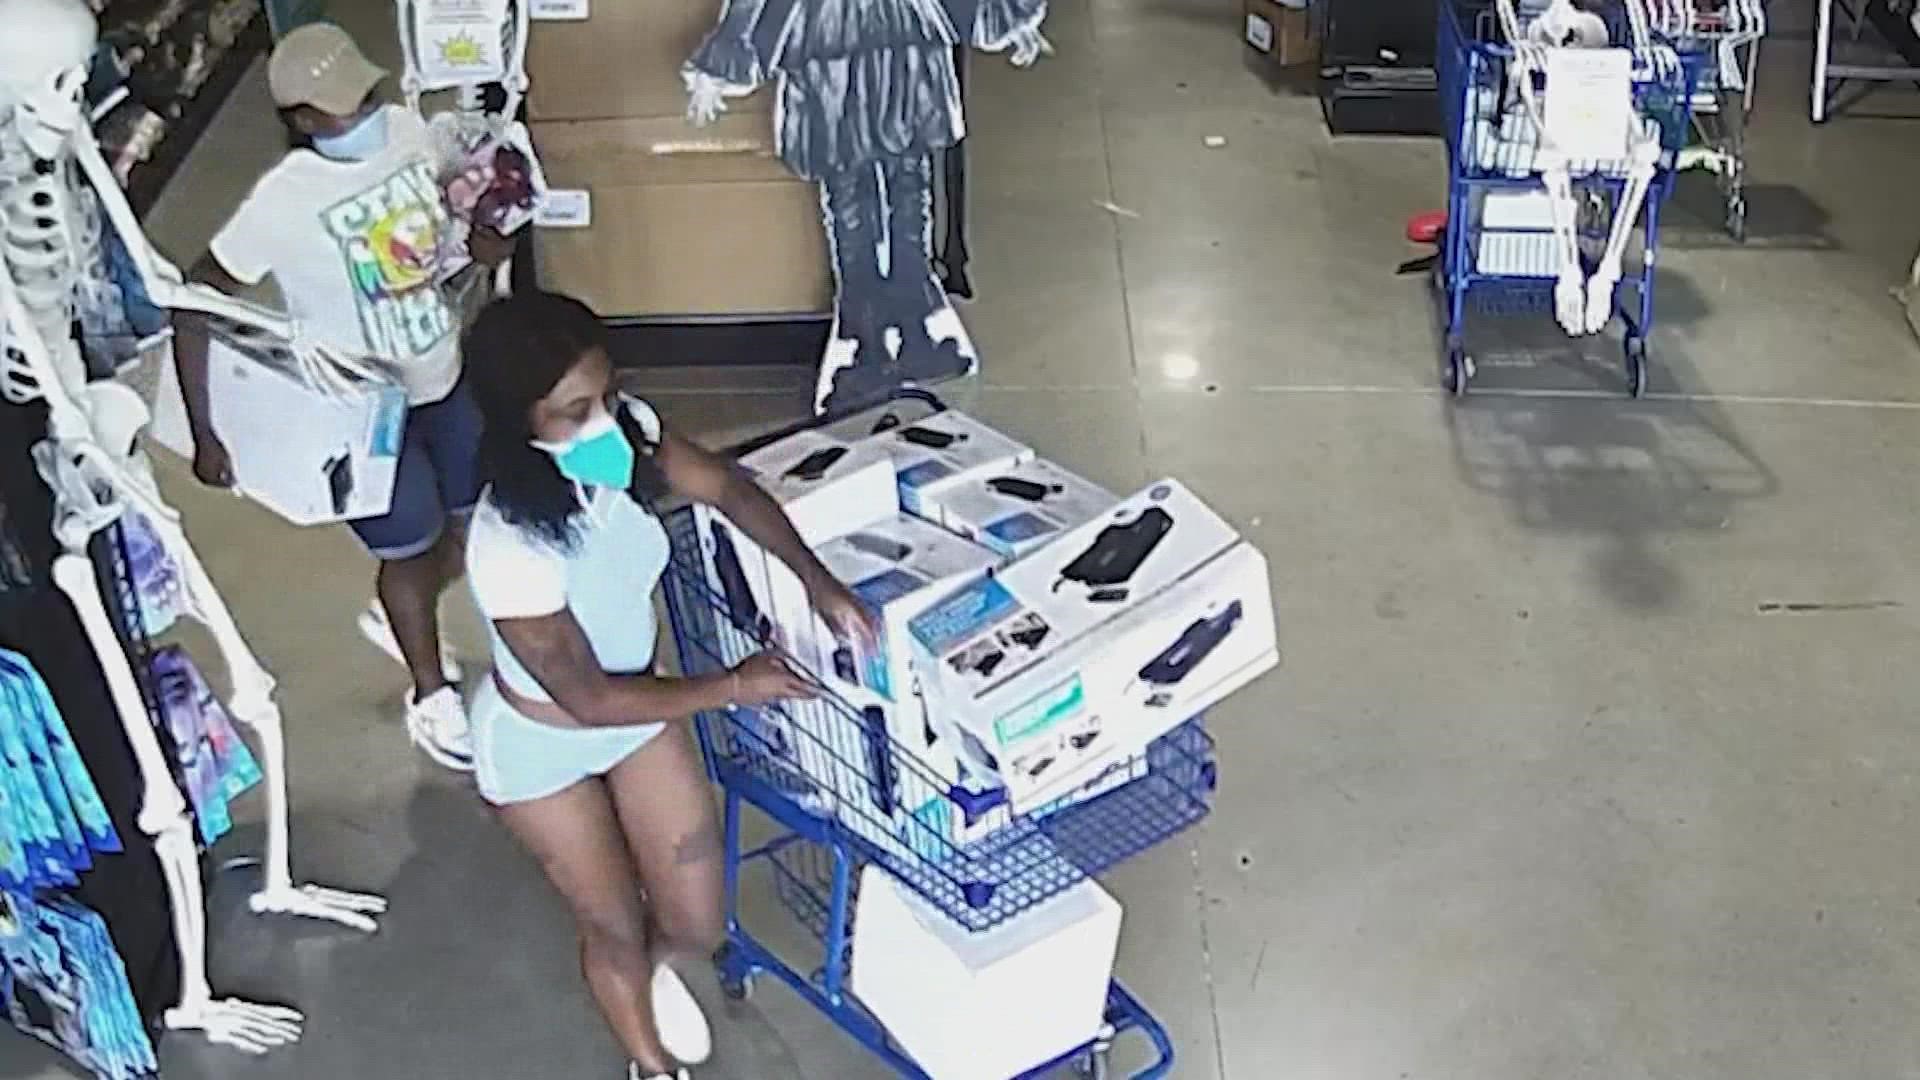 Two women picked trick over treat, causing a small business owner to chase them down they attempted to steam $1,000 worth of supplies from a Halloween store.